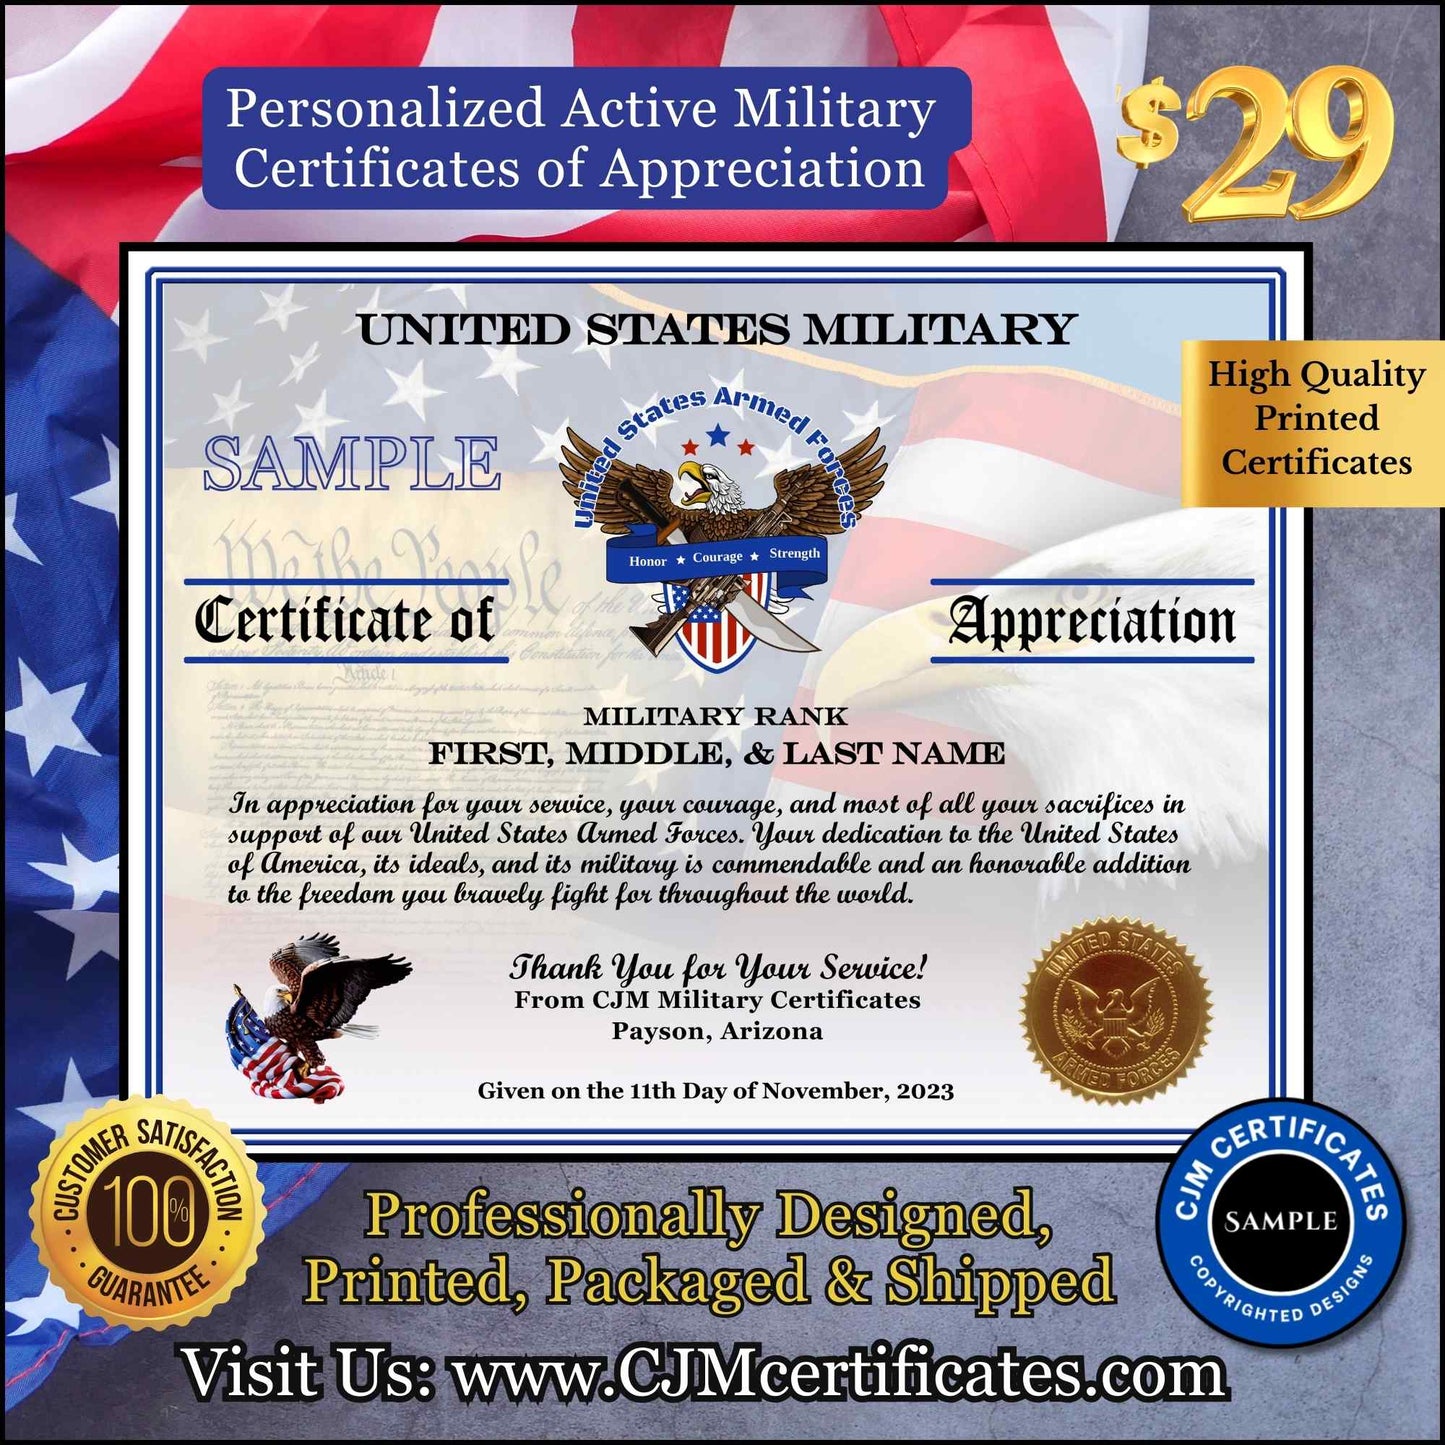 New Active Military Certificates of Appreciation